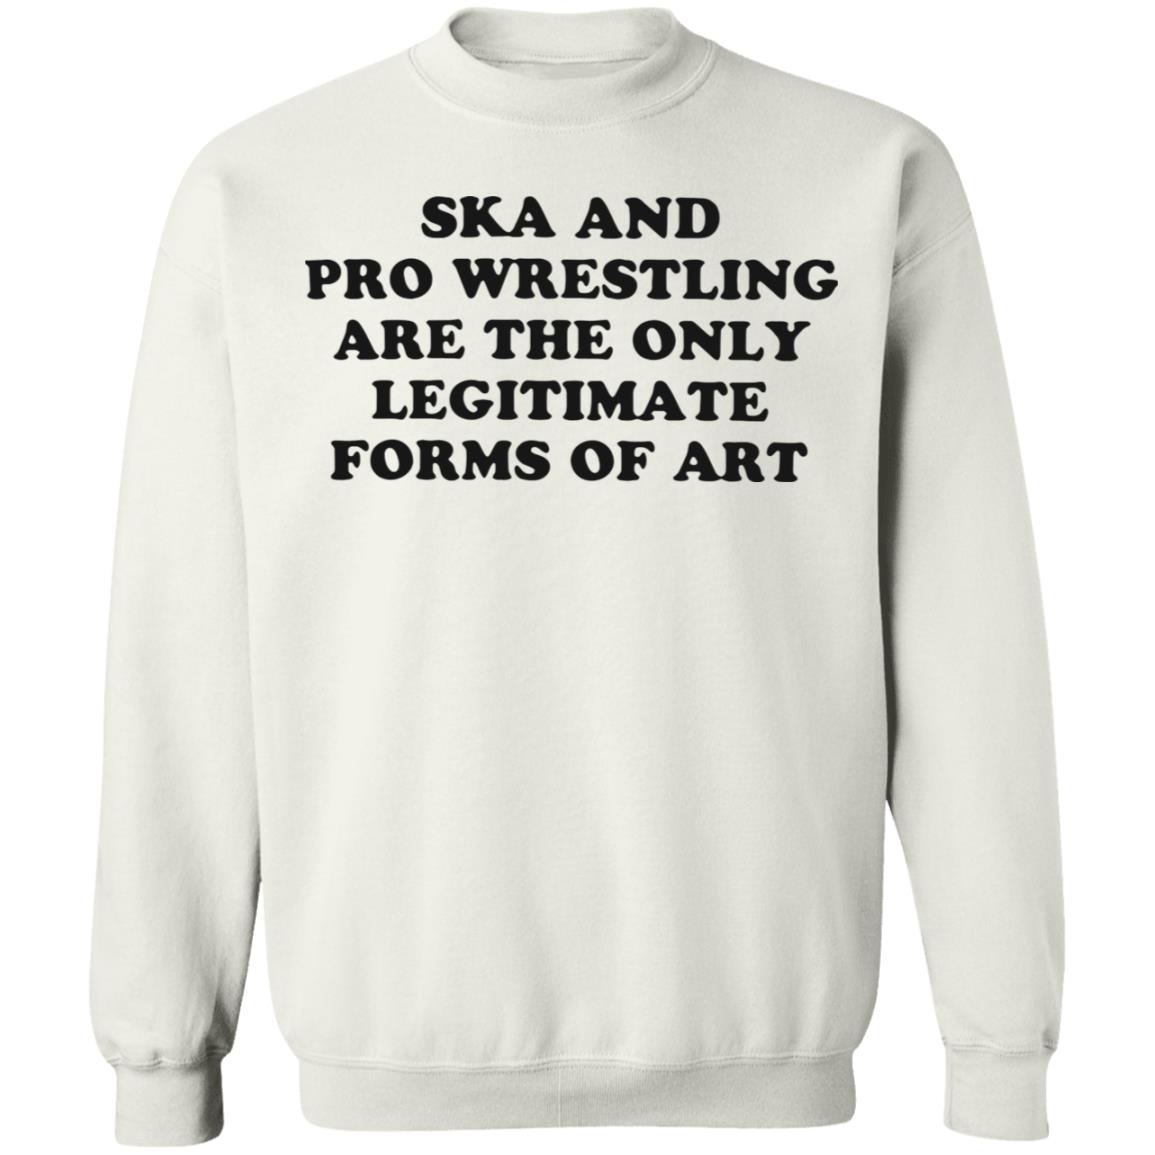 Ska And Pro Wrestling Are The Only Legitimate Forms Of Art Shirt 2